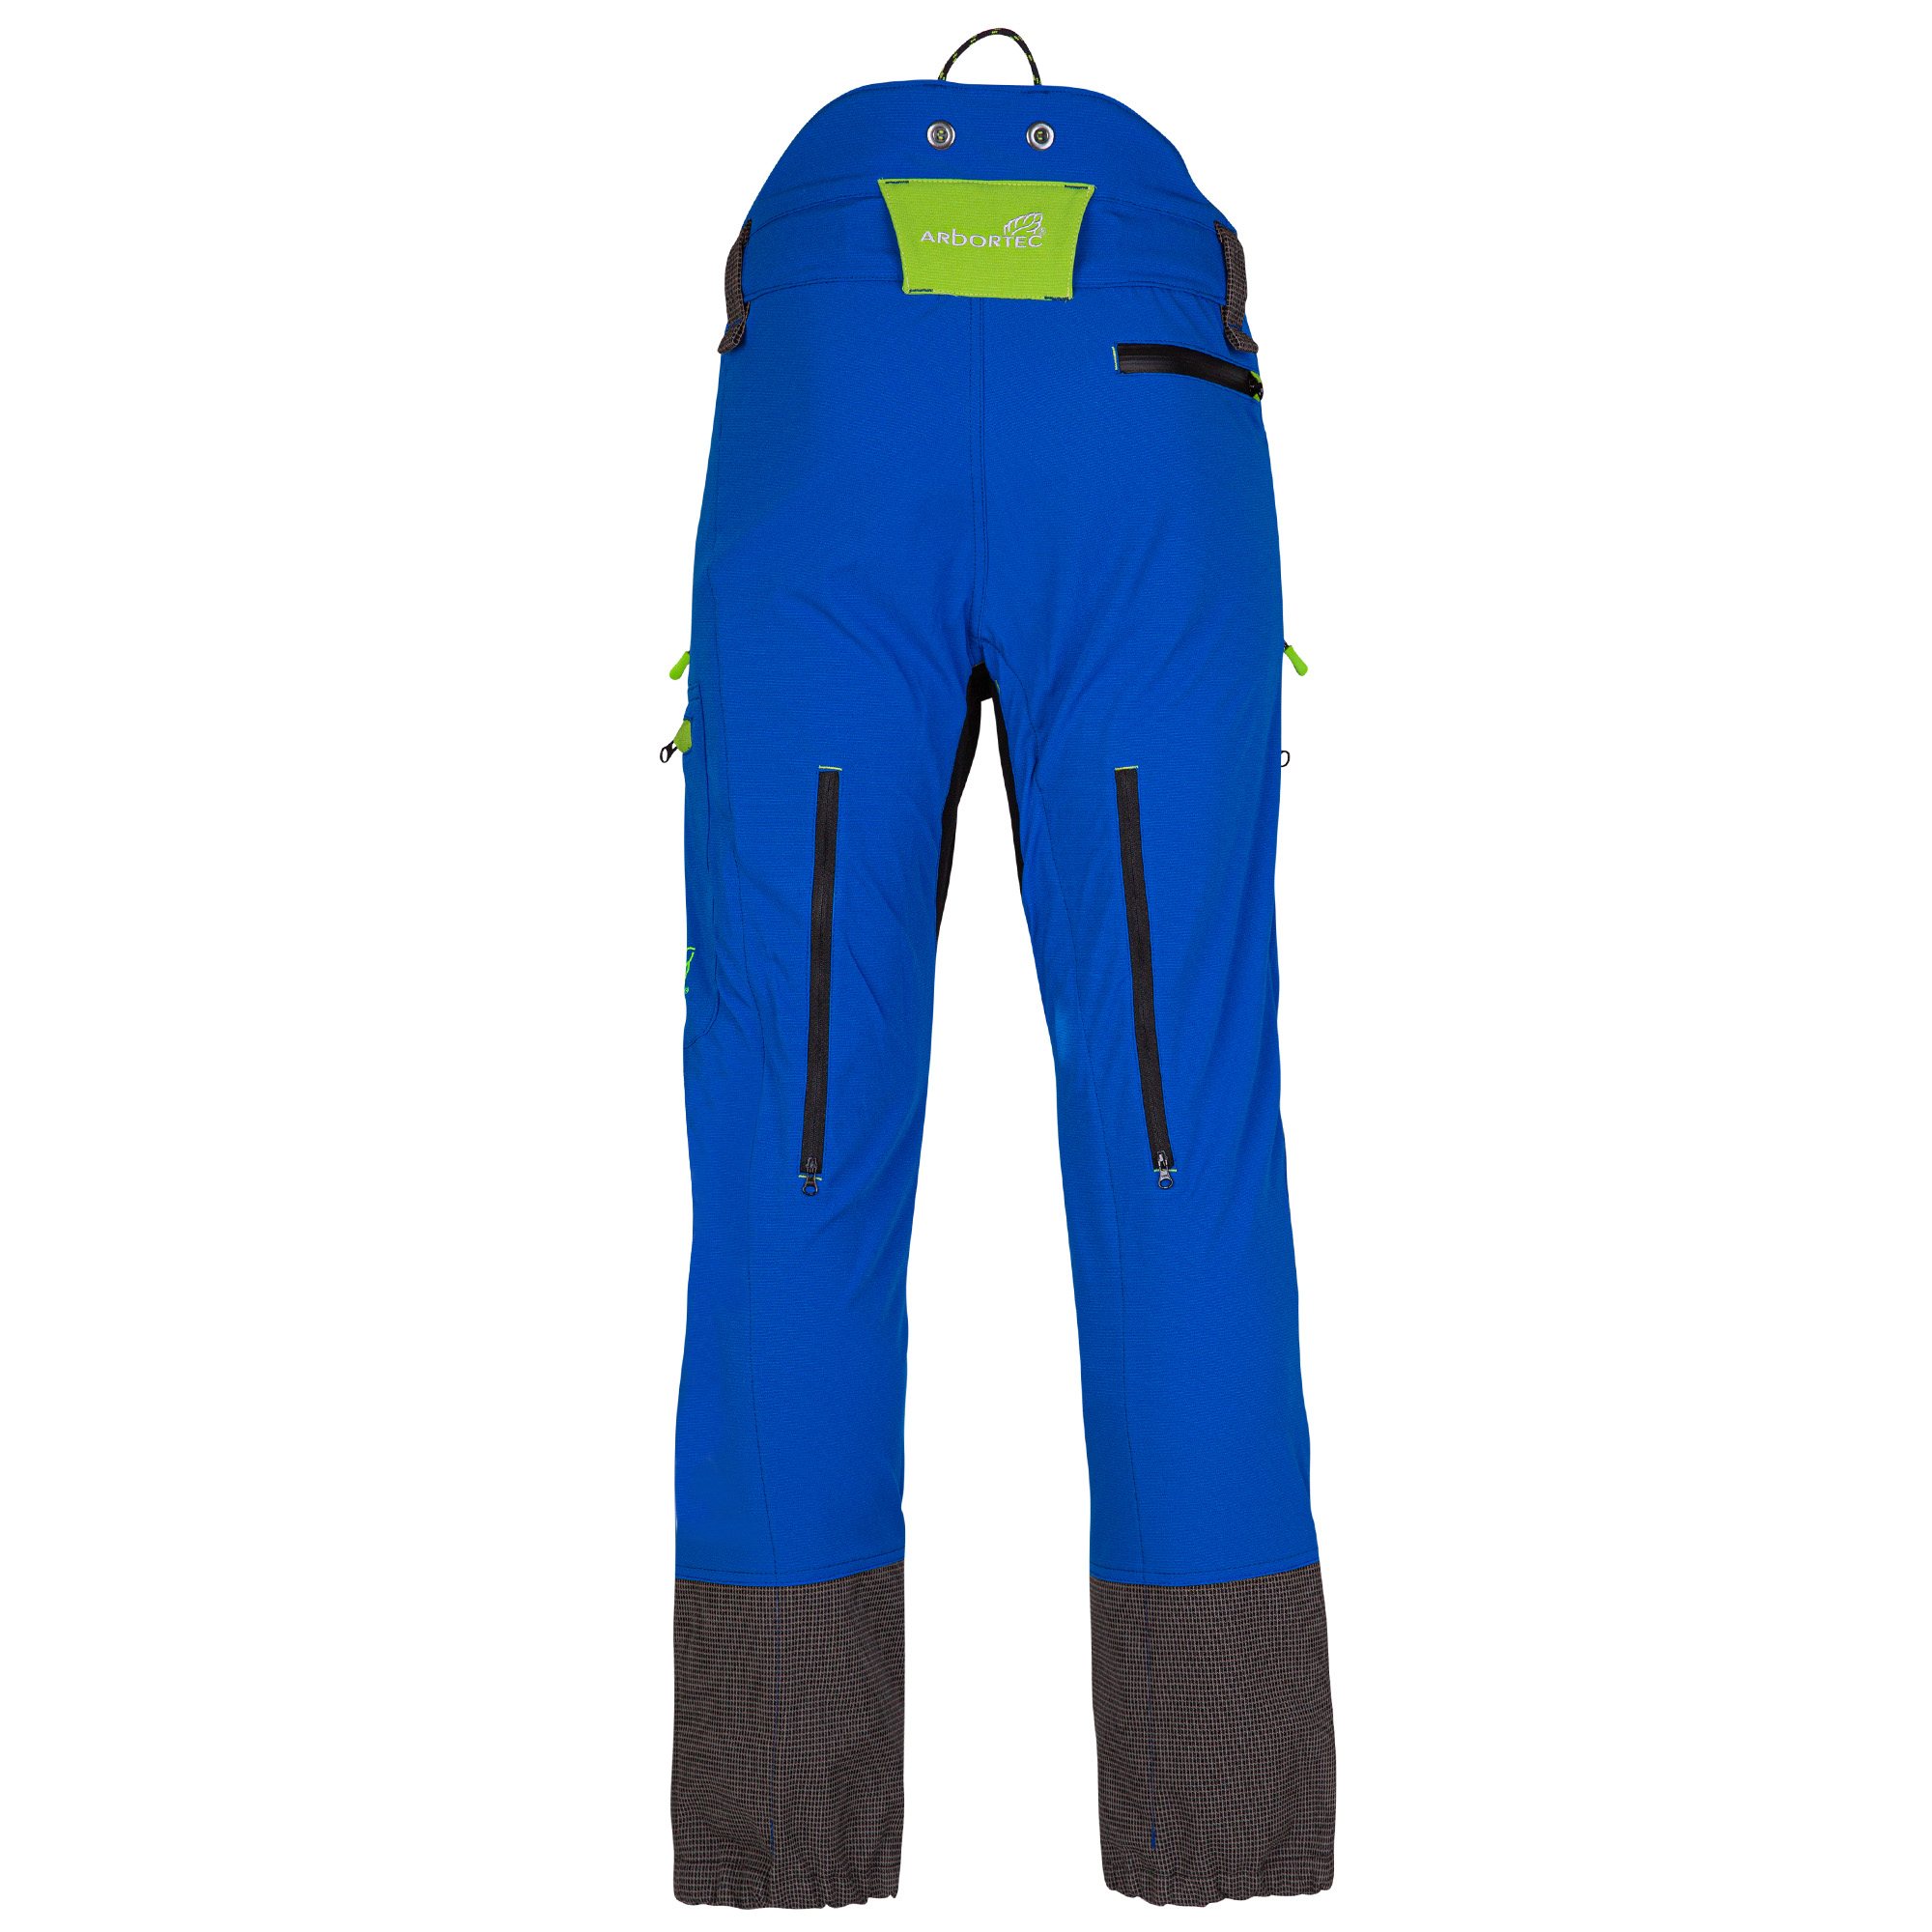 AT4070 Breatheflex Pro Design C Class 1 Chainsaw Trousers - Blue